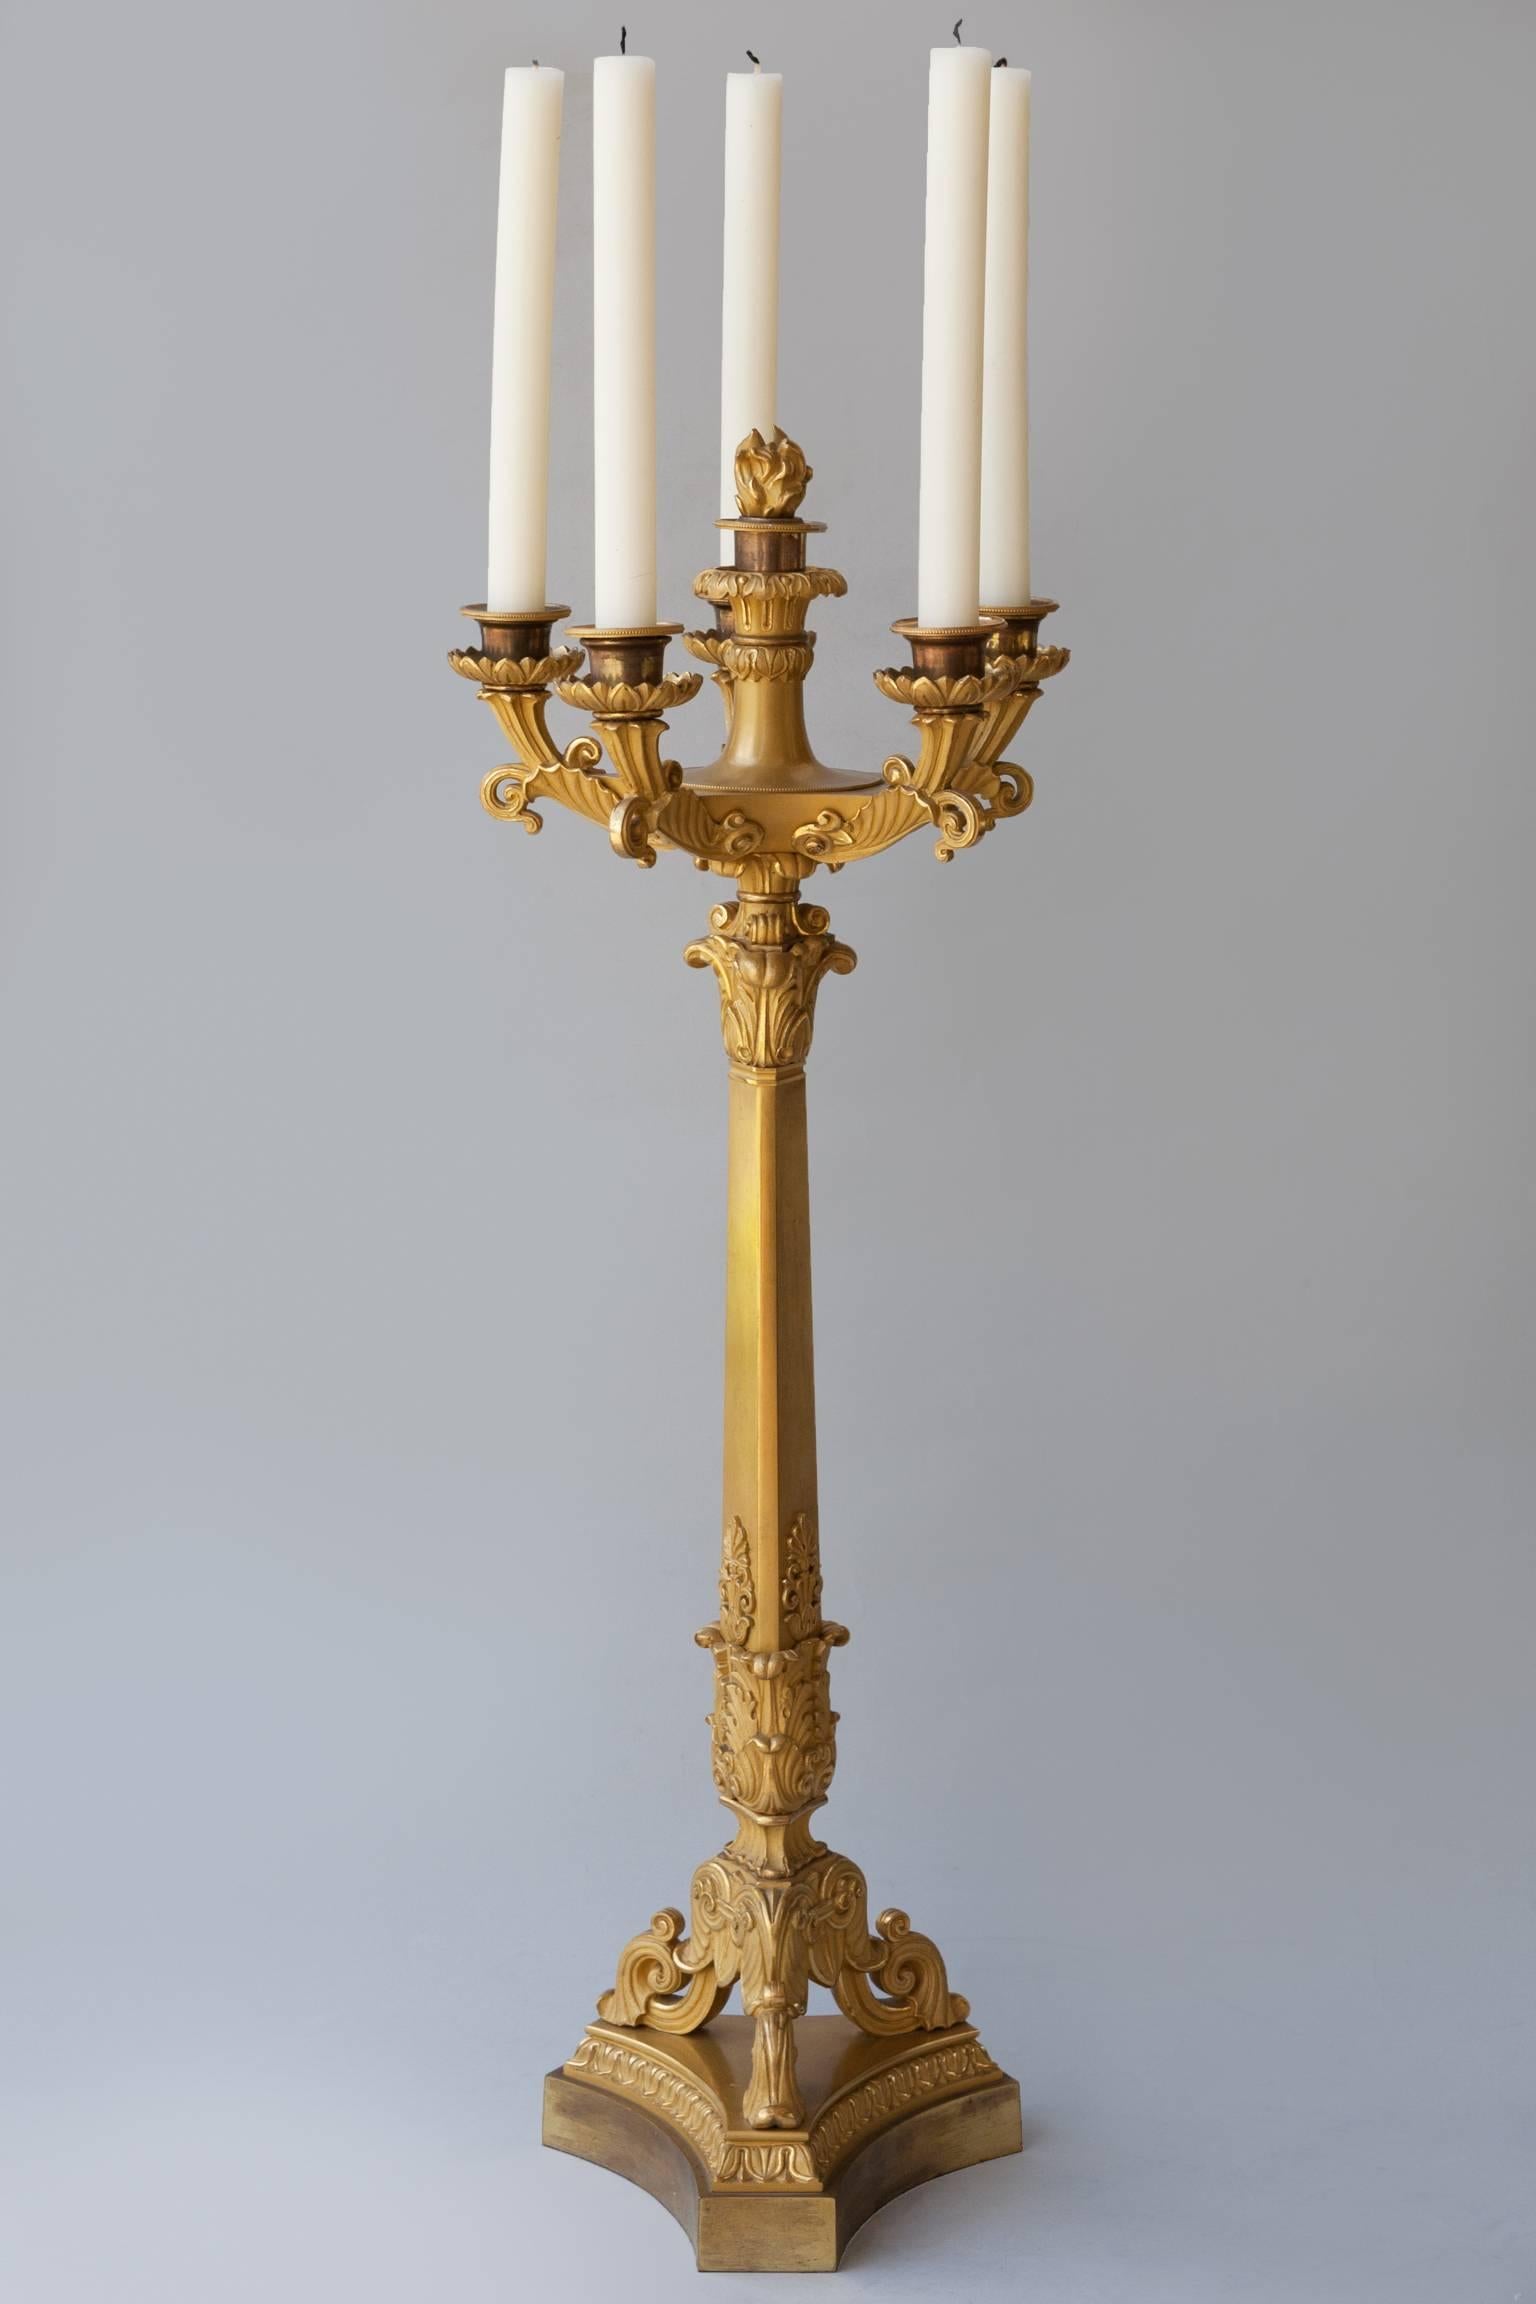 The dished top with five outscrolling arms and a central candleholder surmounted by a detachable flaming finial or flambeau.
The triangular central column on a tripod base with three scrolling feet mounted on a triangular concave base.
The whole